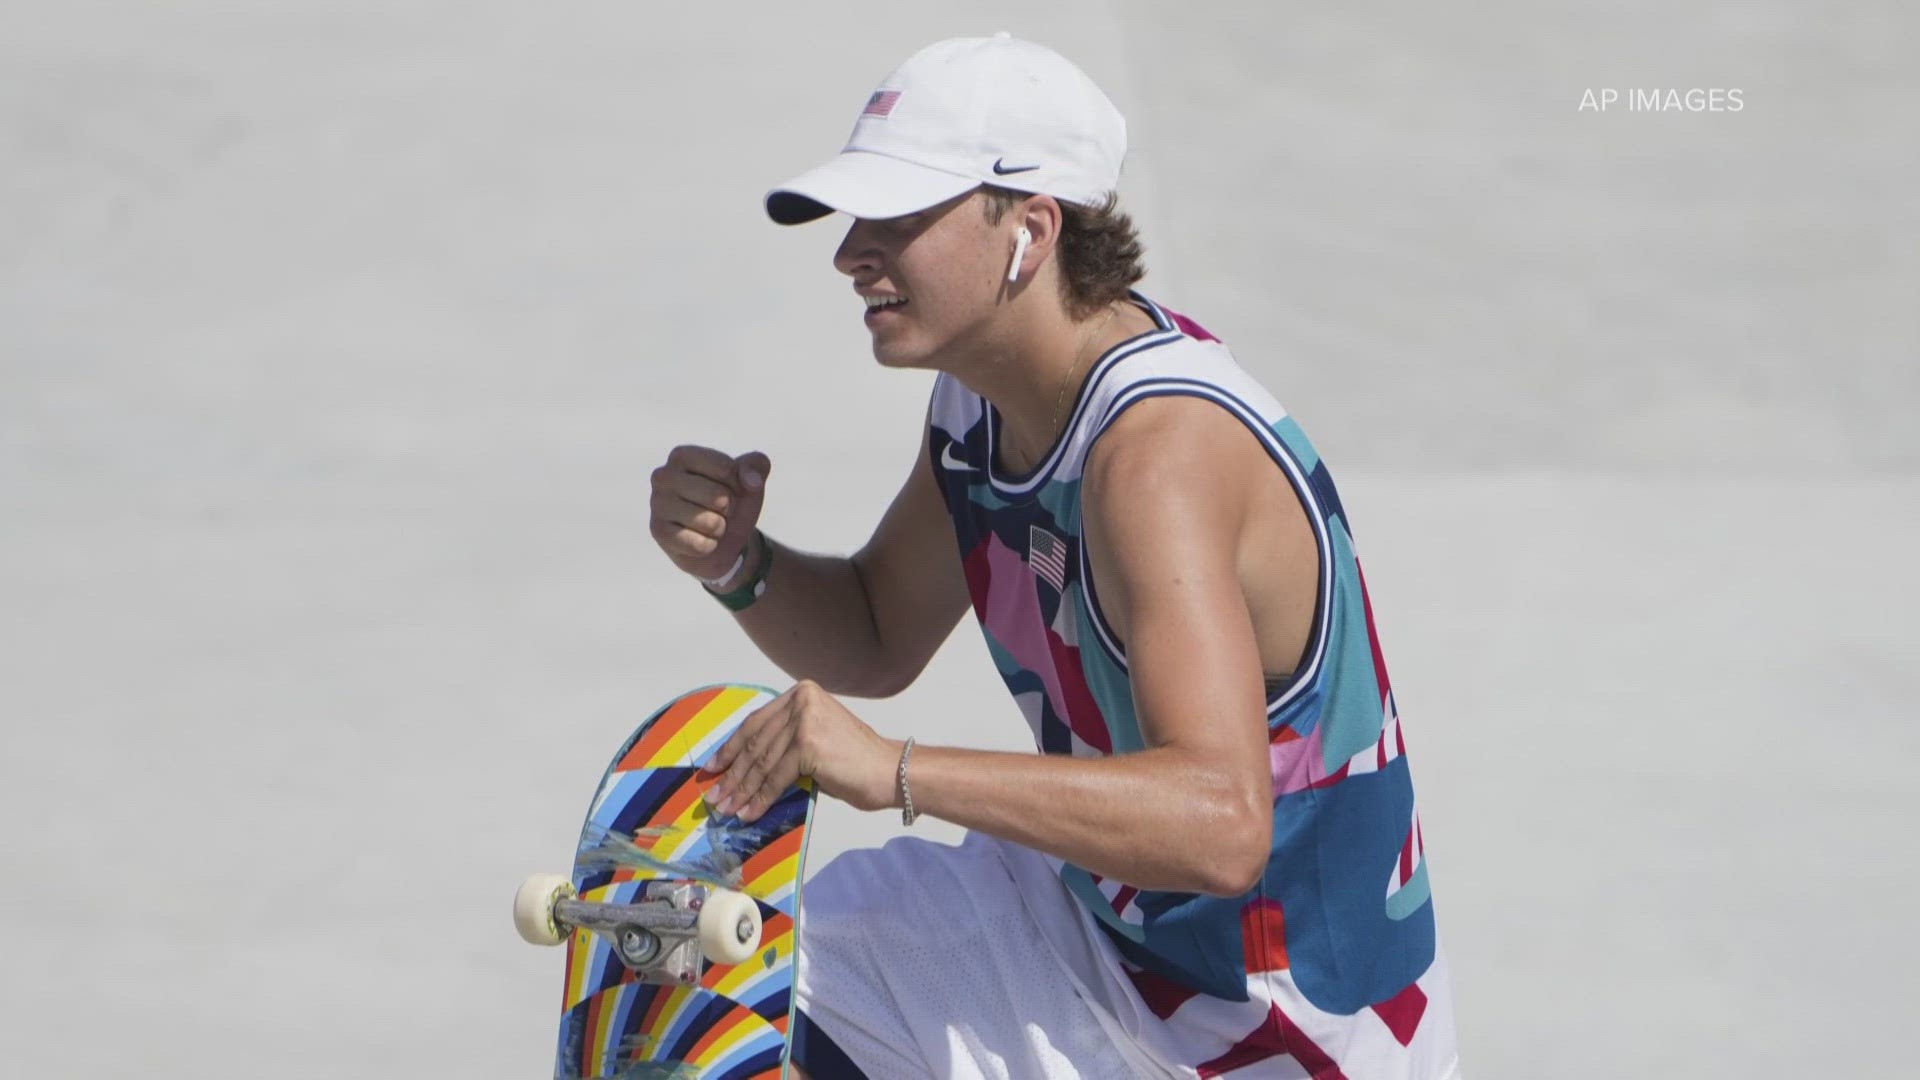 Jagger Eaton won a bronze medal back in 2021 for skateboarding, becoming one of the first people to bring home a medal in the new Olympic sport.